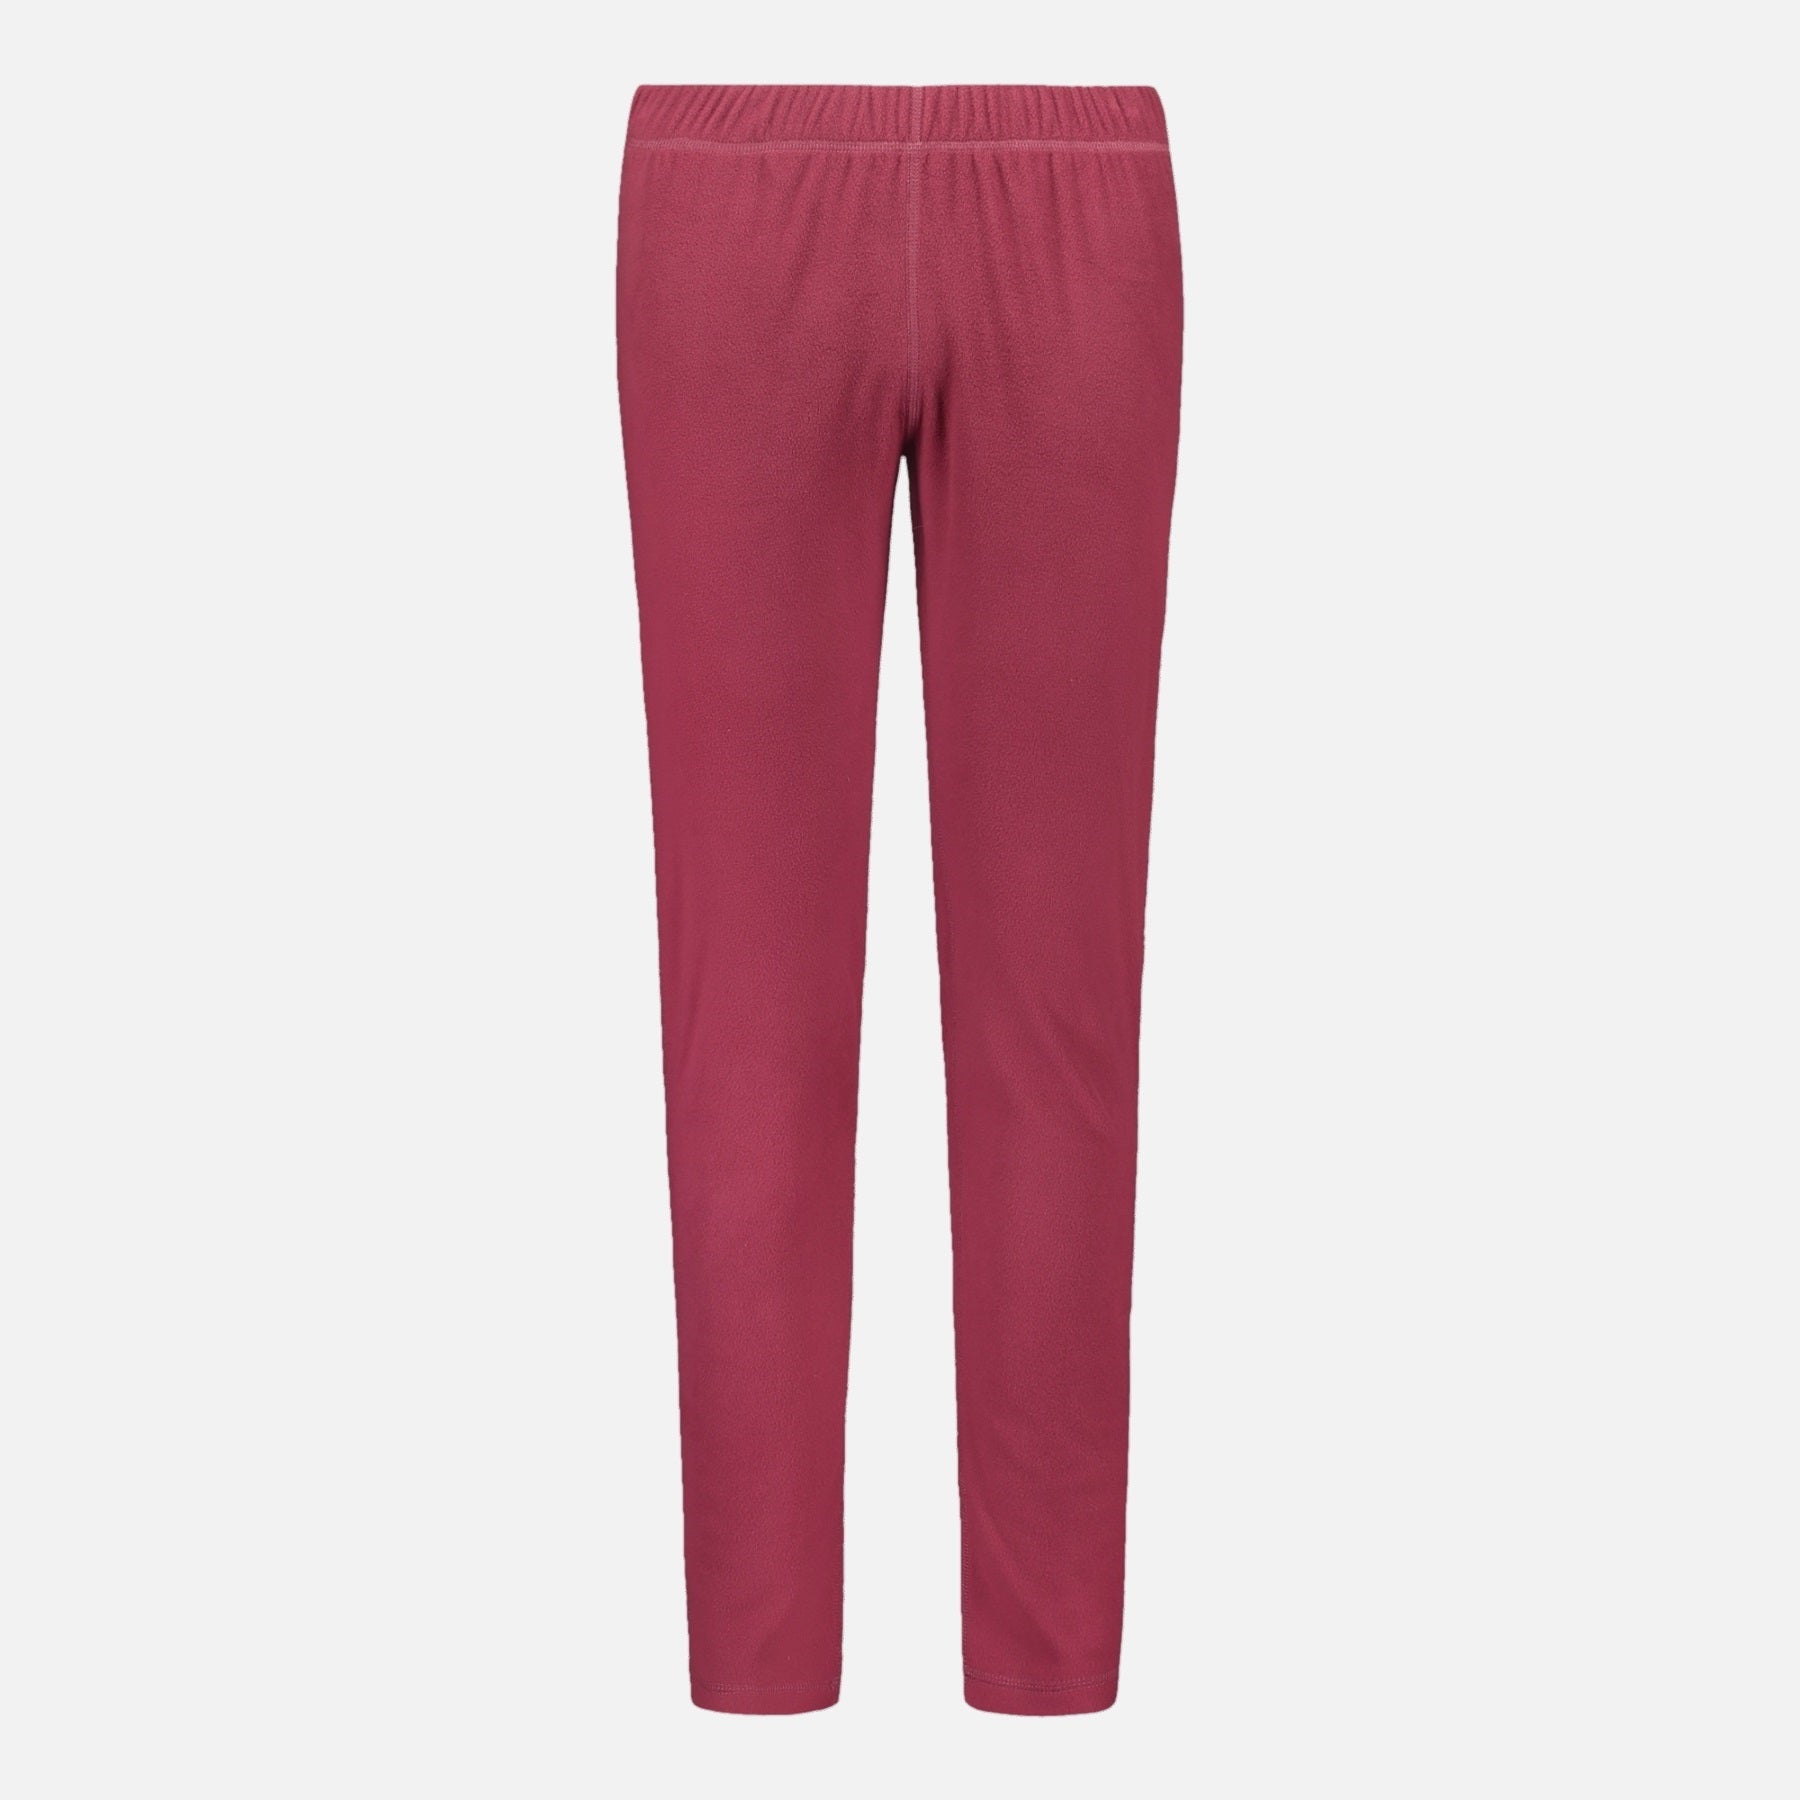 Catmandoo Ladies Thermal Fleece Leggings in Cherry - The Golf Outfit